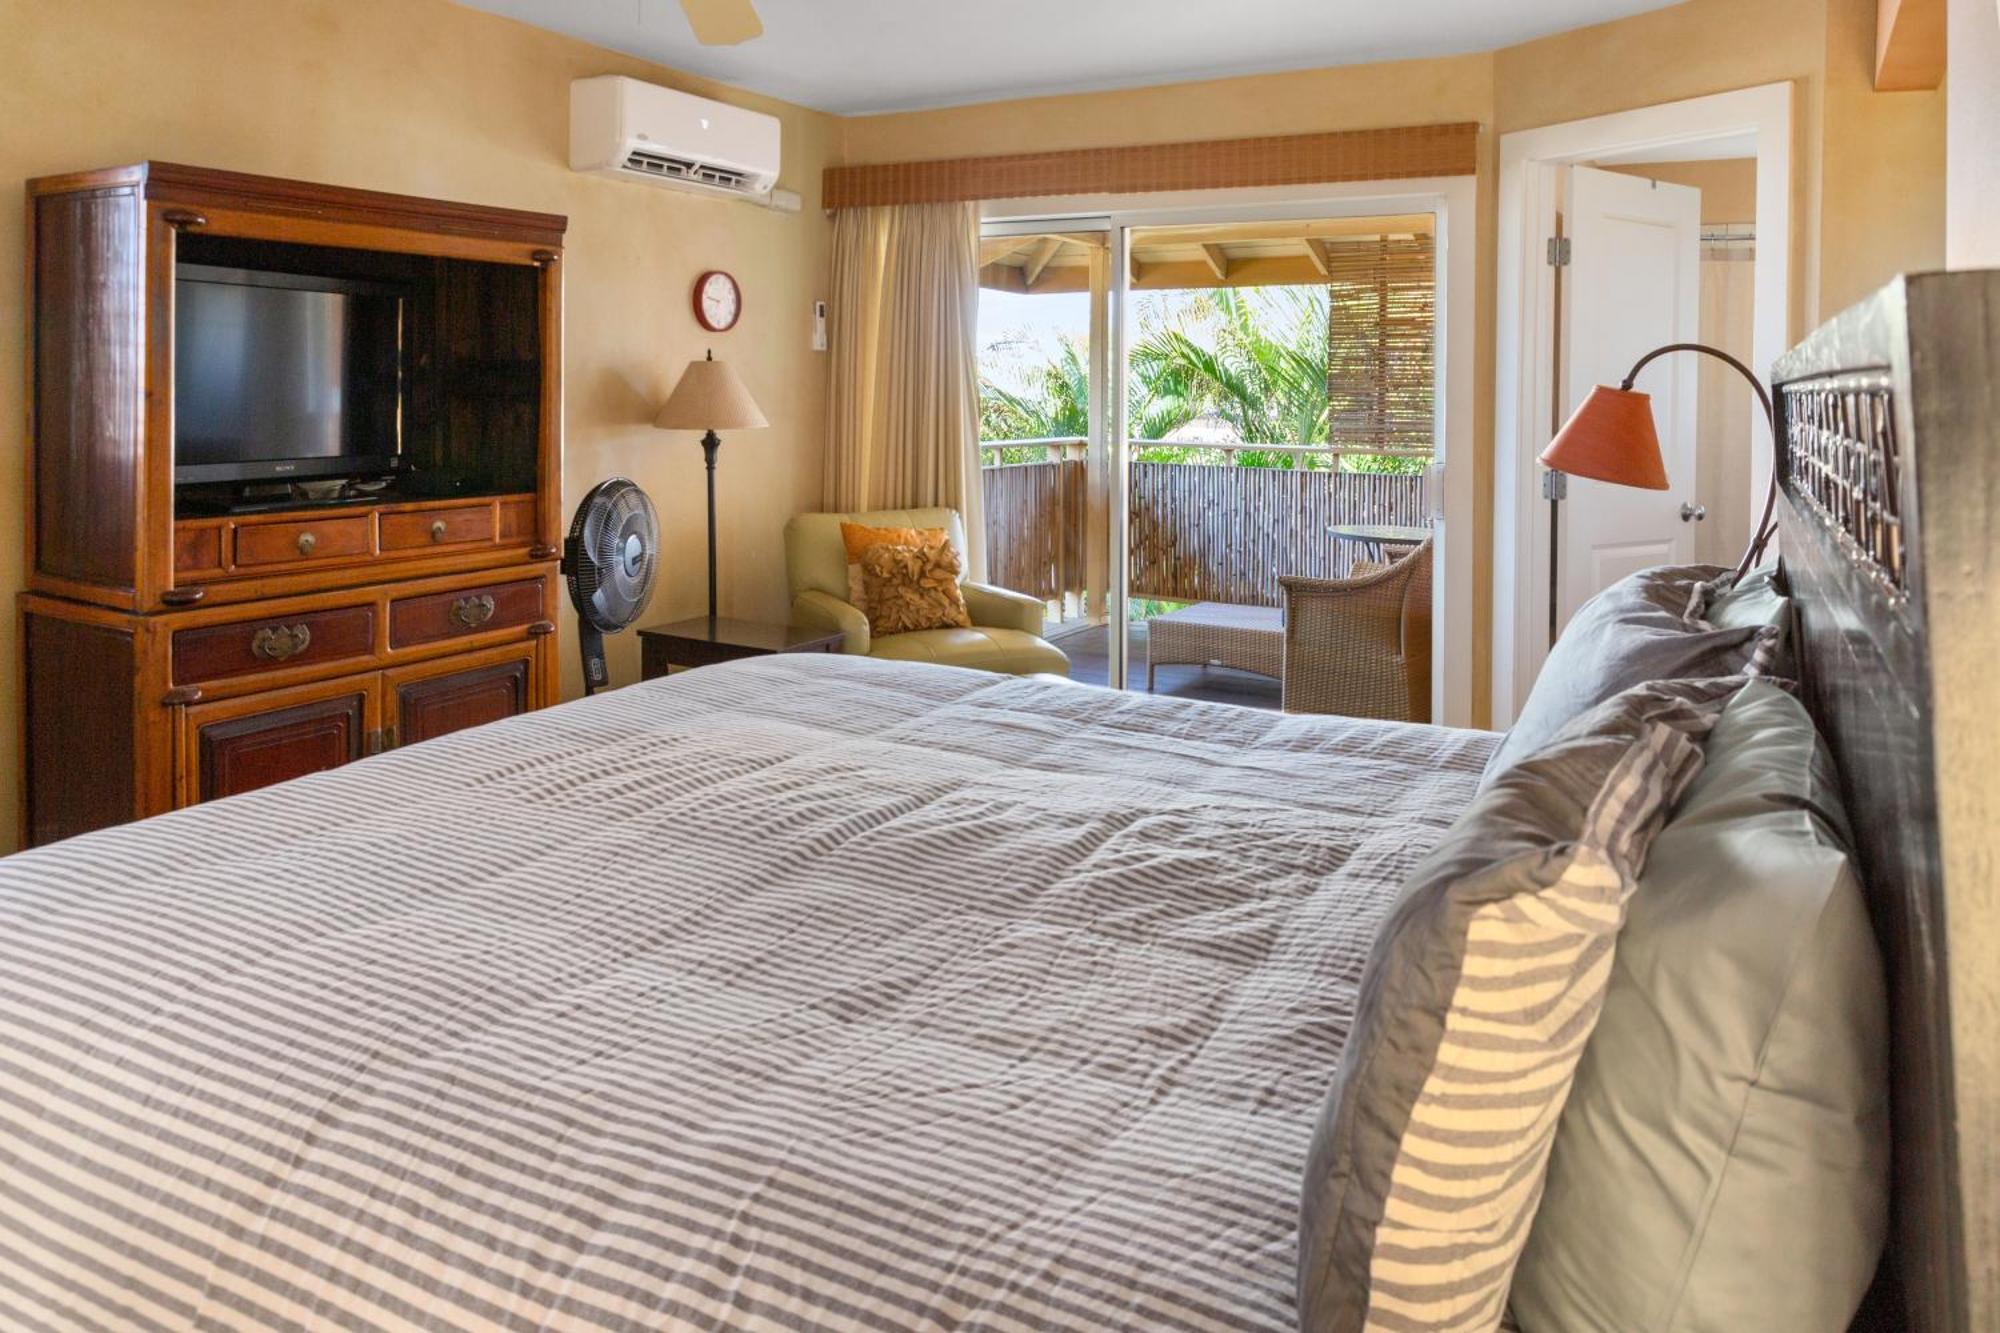 Orchid Suite In South Maui, Across From The Beach, 1 Bedroom Sleeps 4 基黑 外观 照片